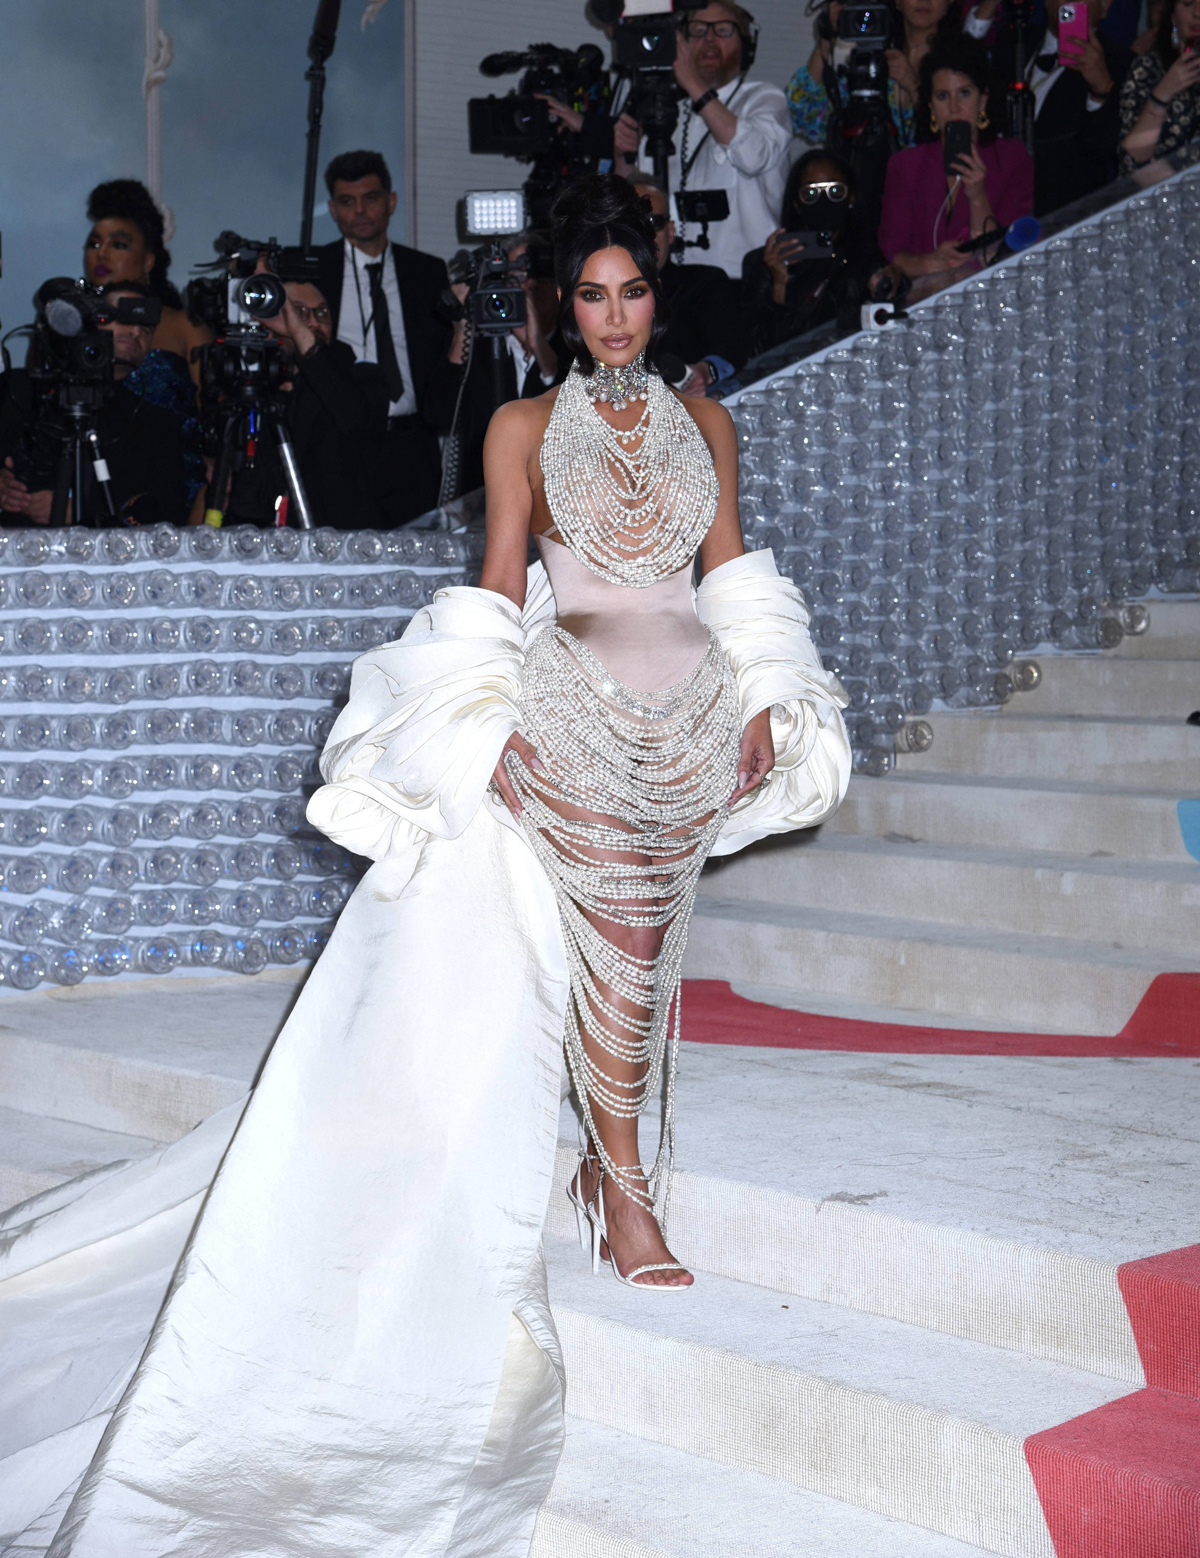 North West Gives 'Nightmare' Review Of Kim Kardashian's Met Gala Dress -- Minutes Before Red Carpet!